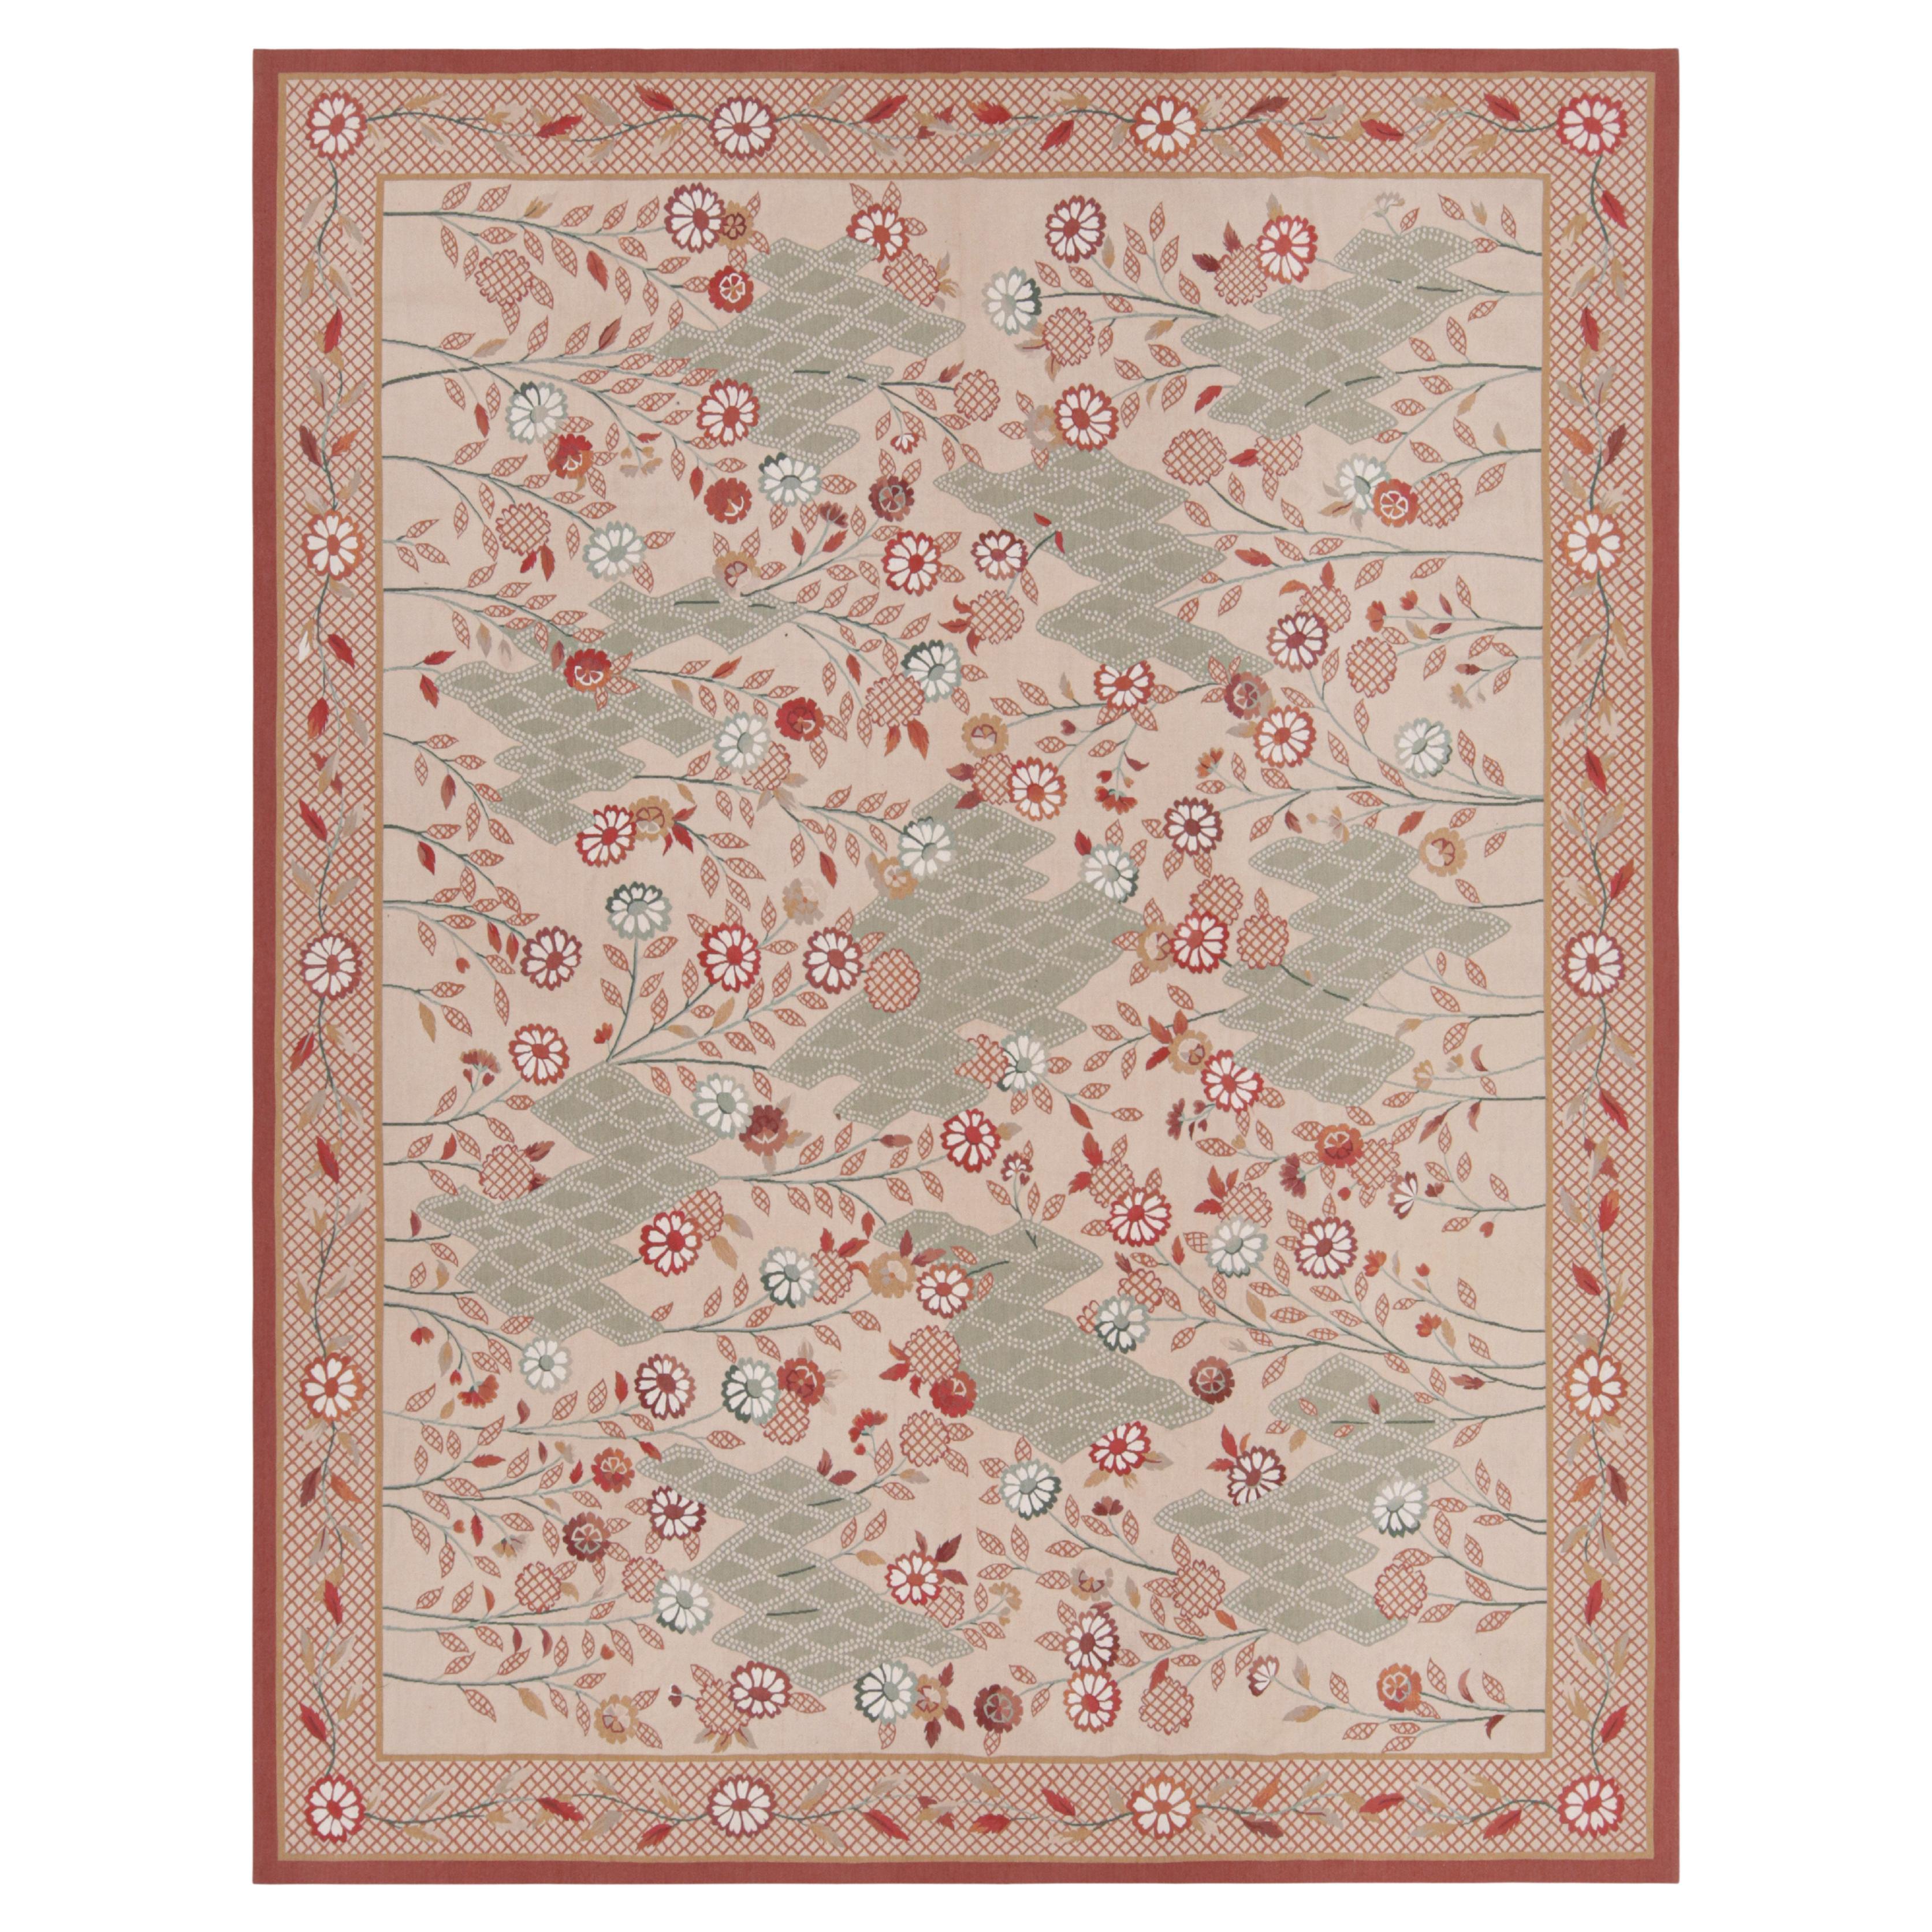 Antique Aubusson Rug with Beige-Brown, Green and Red Florals, from Rug & Kilim For Sale